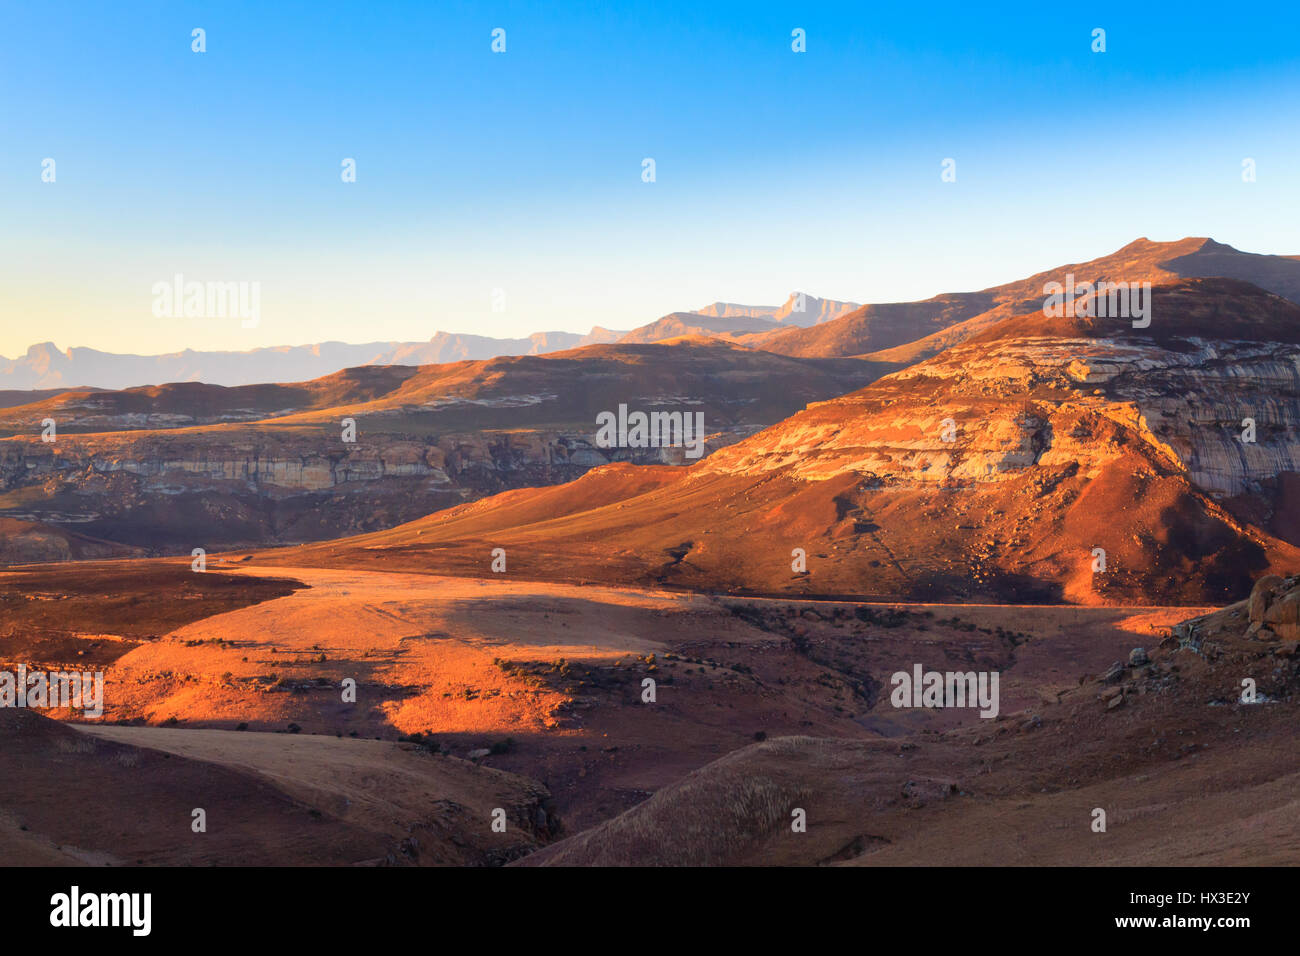 Golden Gate Highlands National Park panorama, South Africa. African landscape Stock Photo